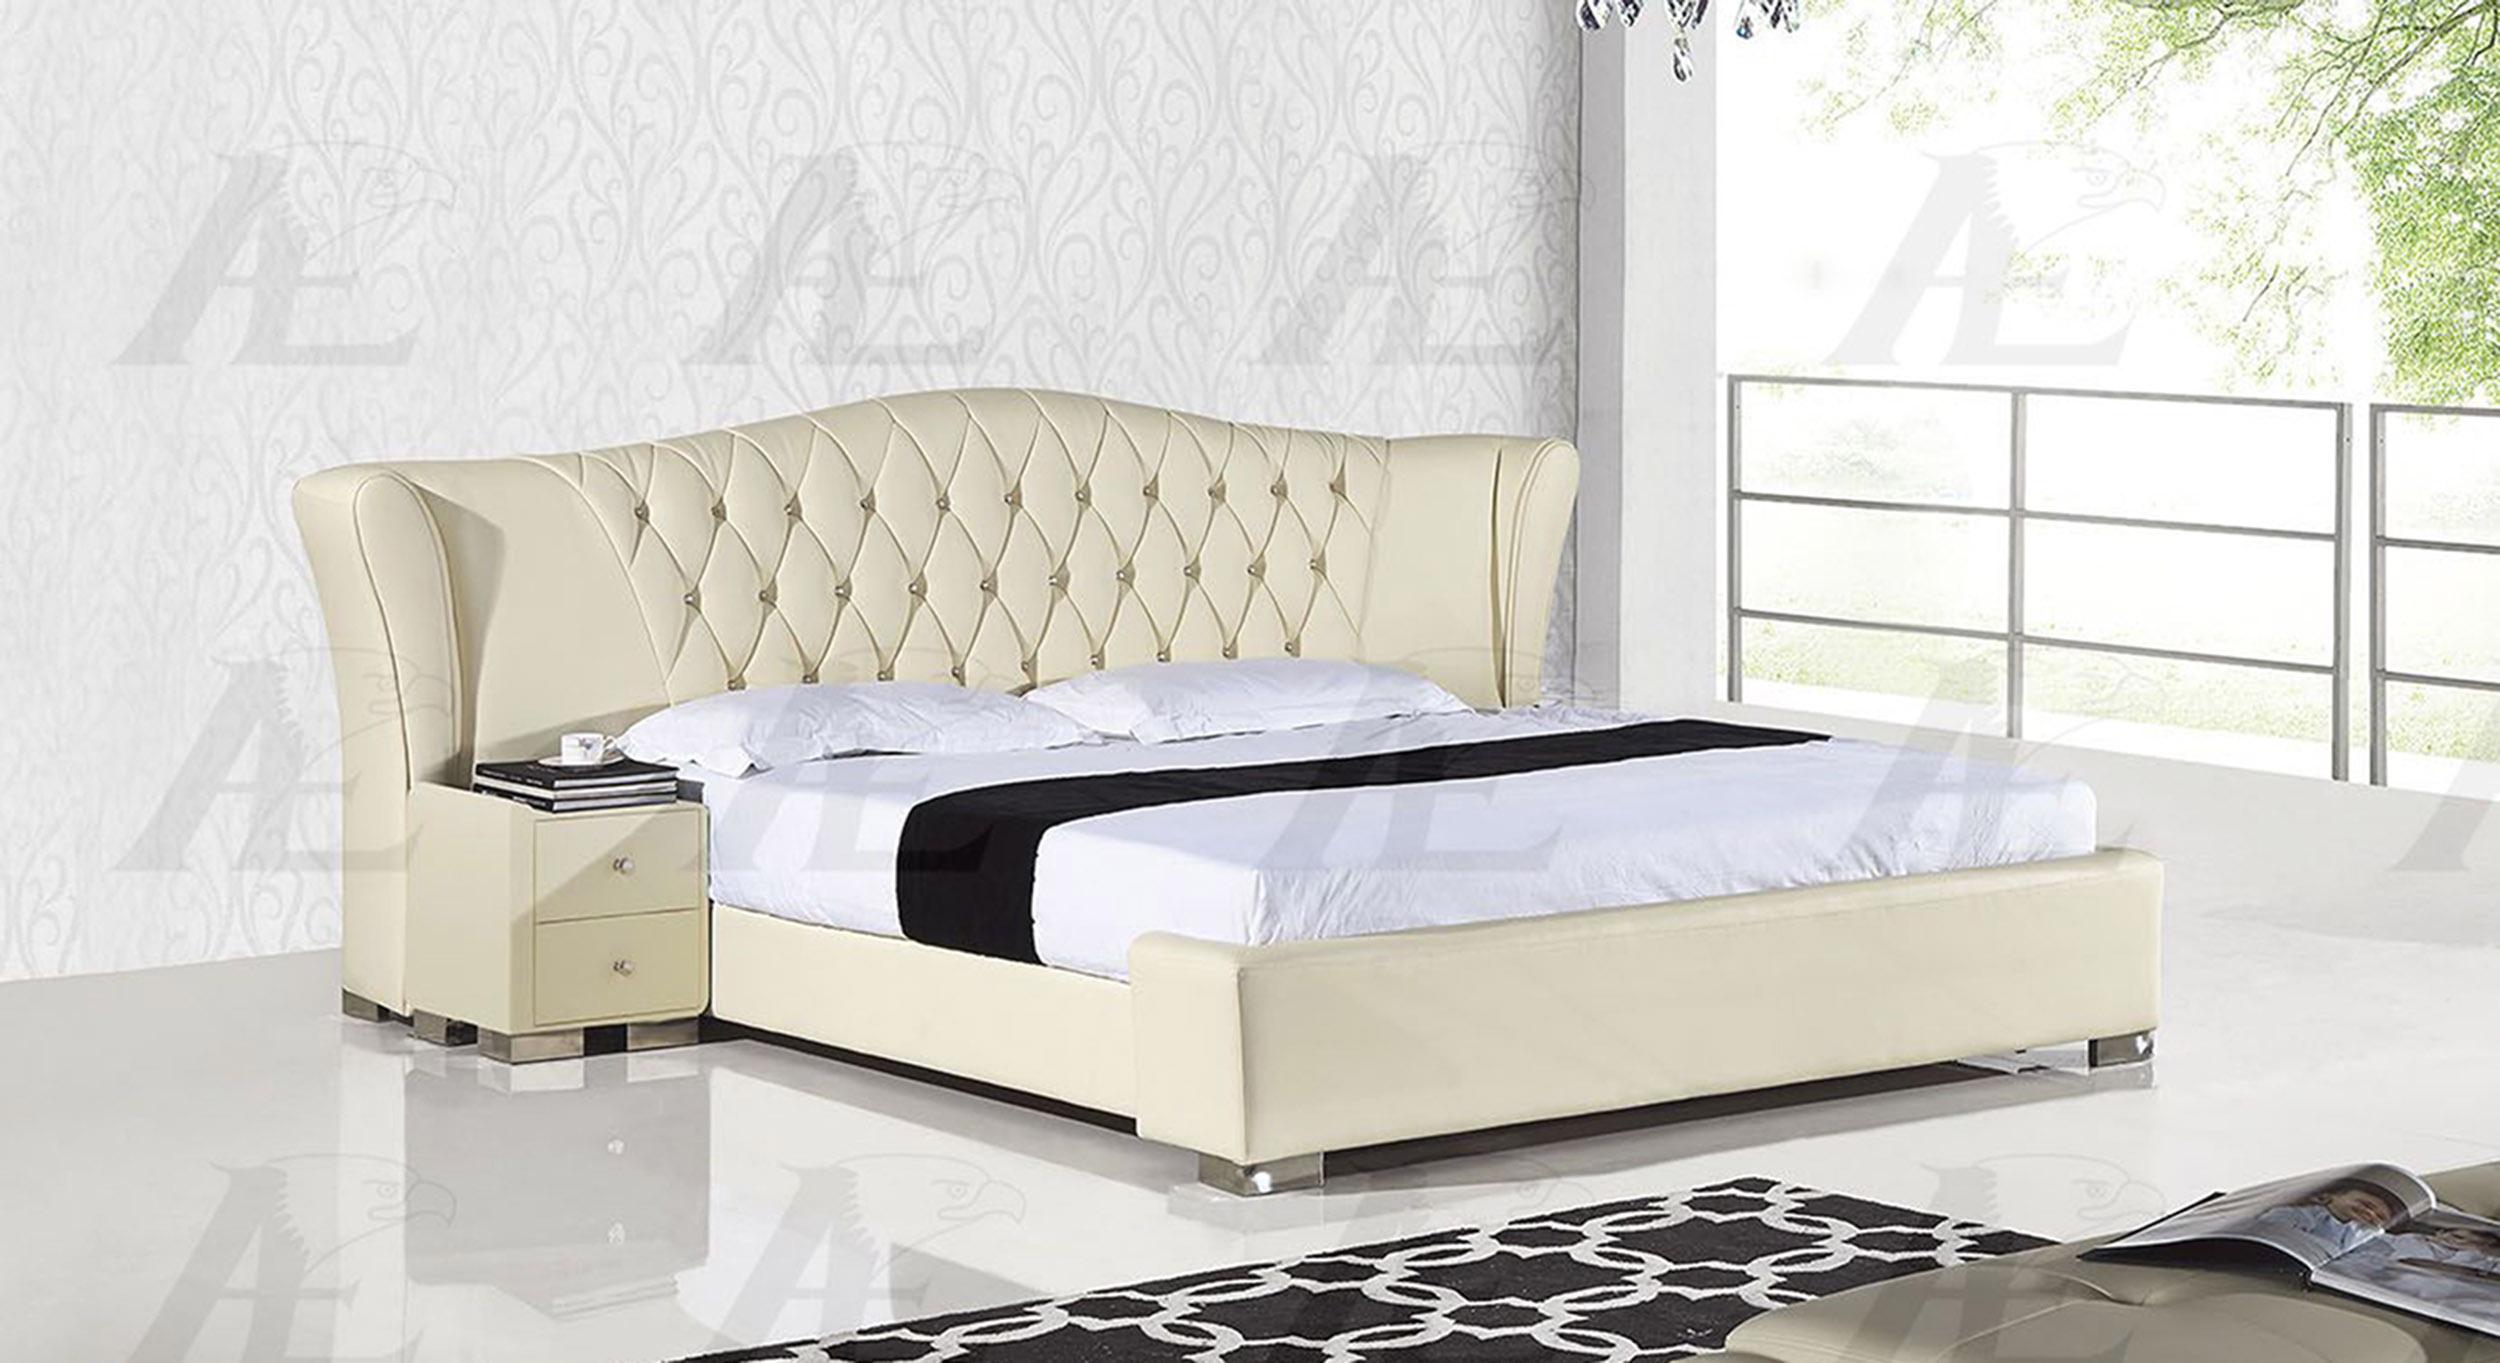 

    
Cream PU King Size Bed & 2 Nightstands Set 3Pcs American Eagle B-D028
